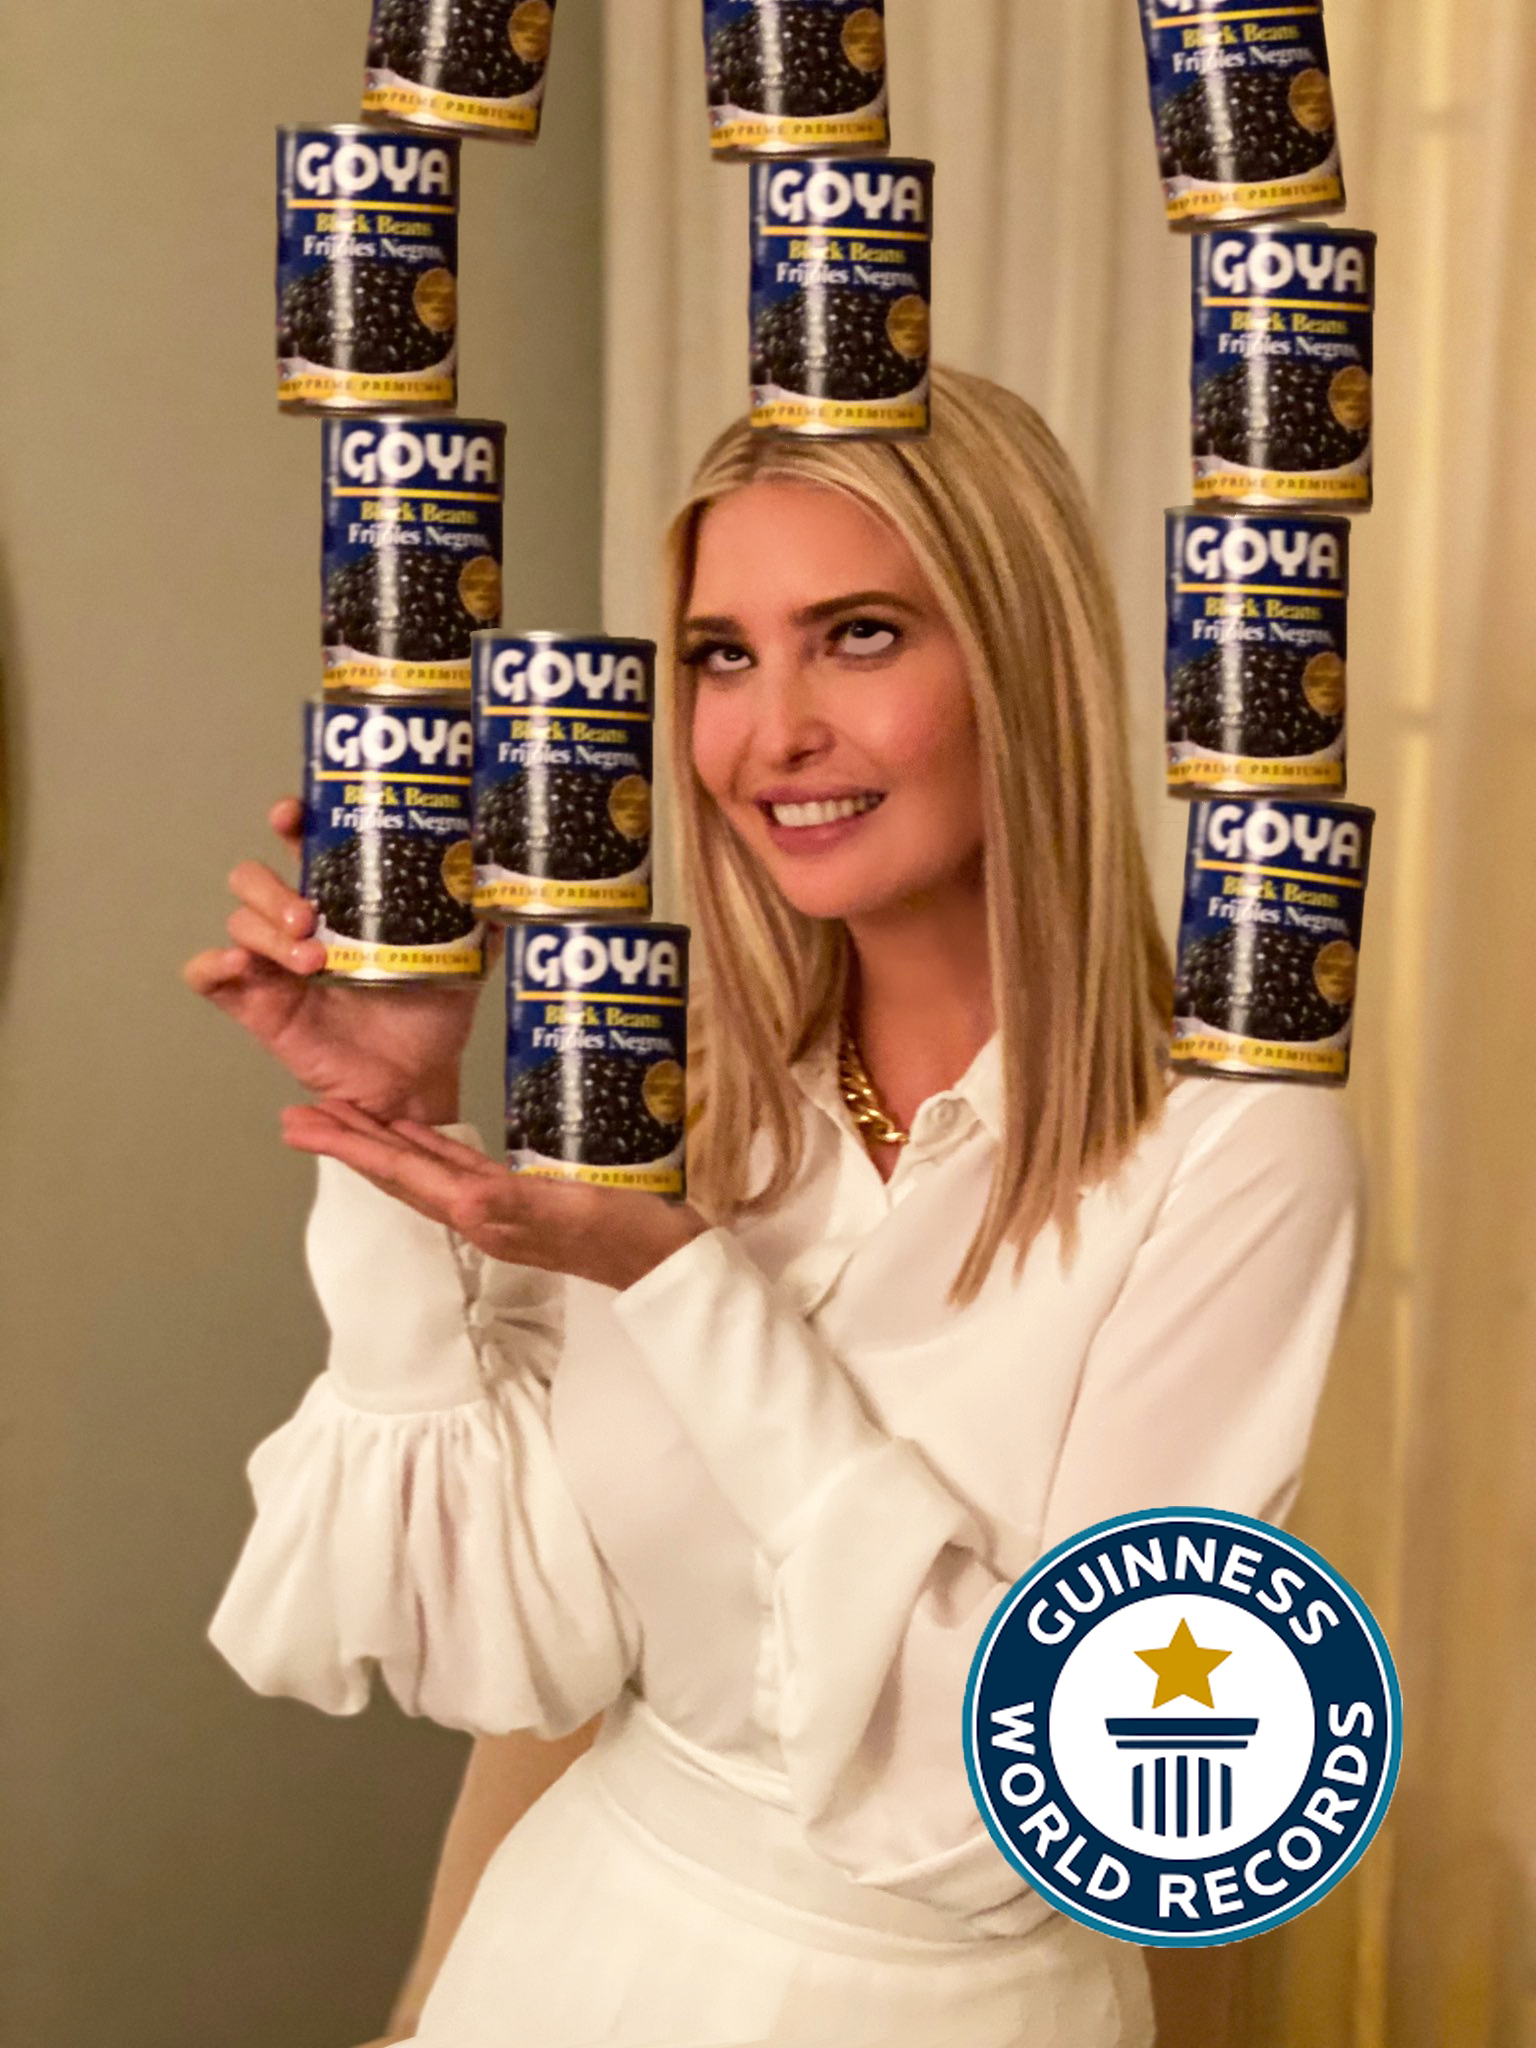 ivanka-trump-took-a-picture-holding-goya-beans-and-the-meme-makes-itself-9.jpg